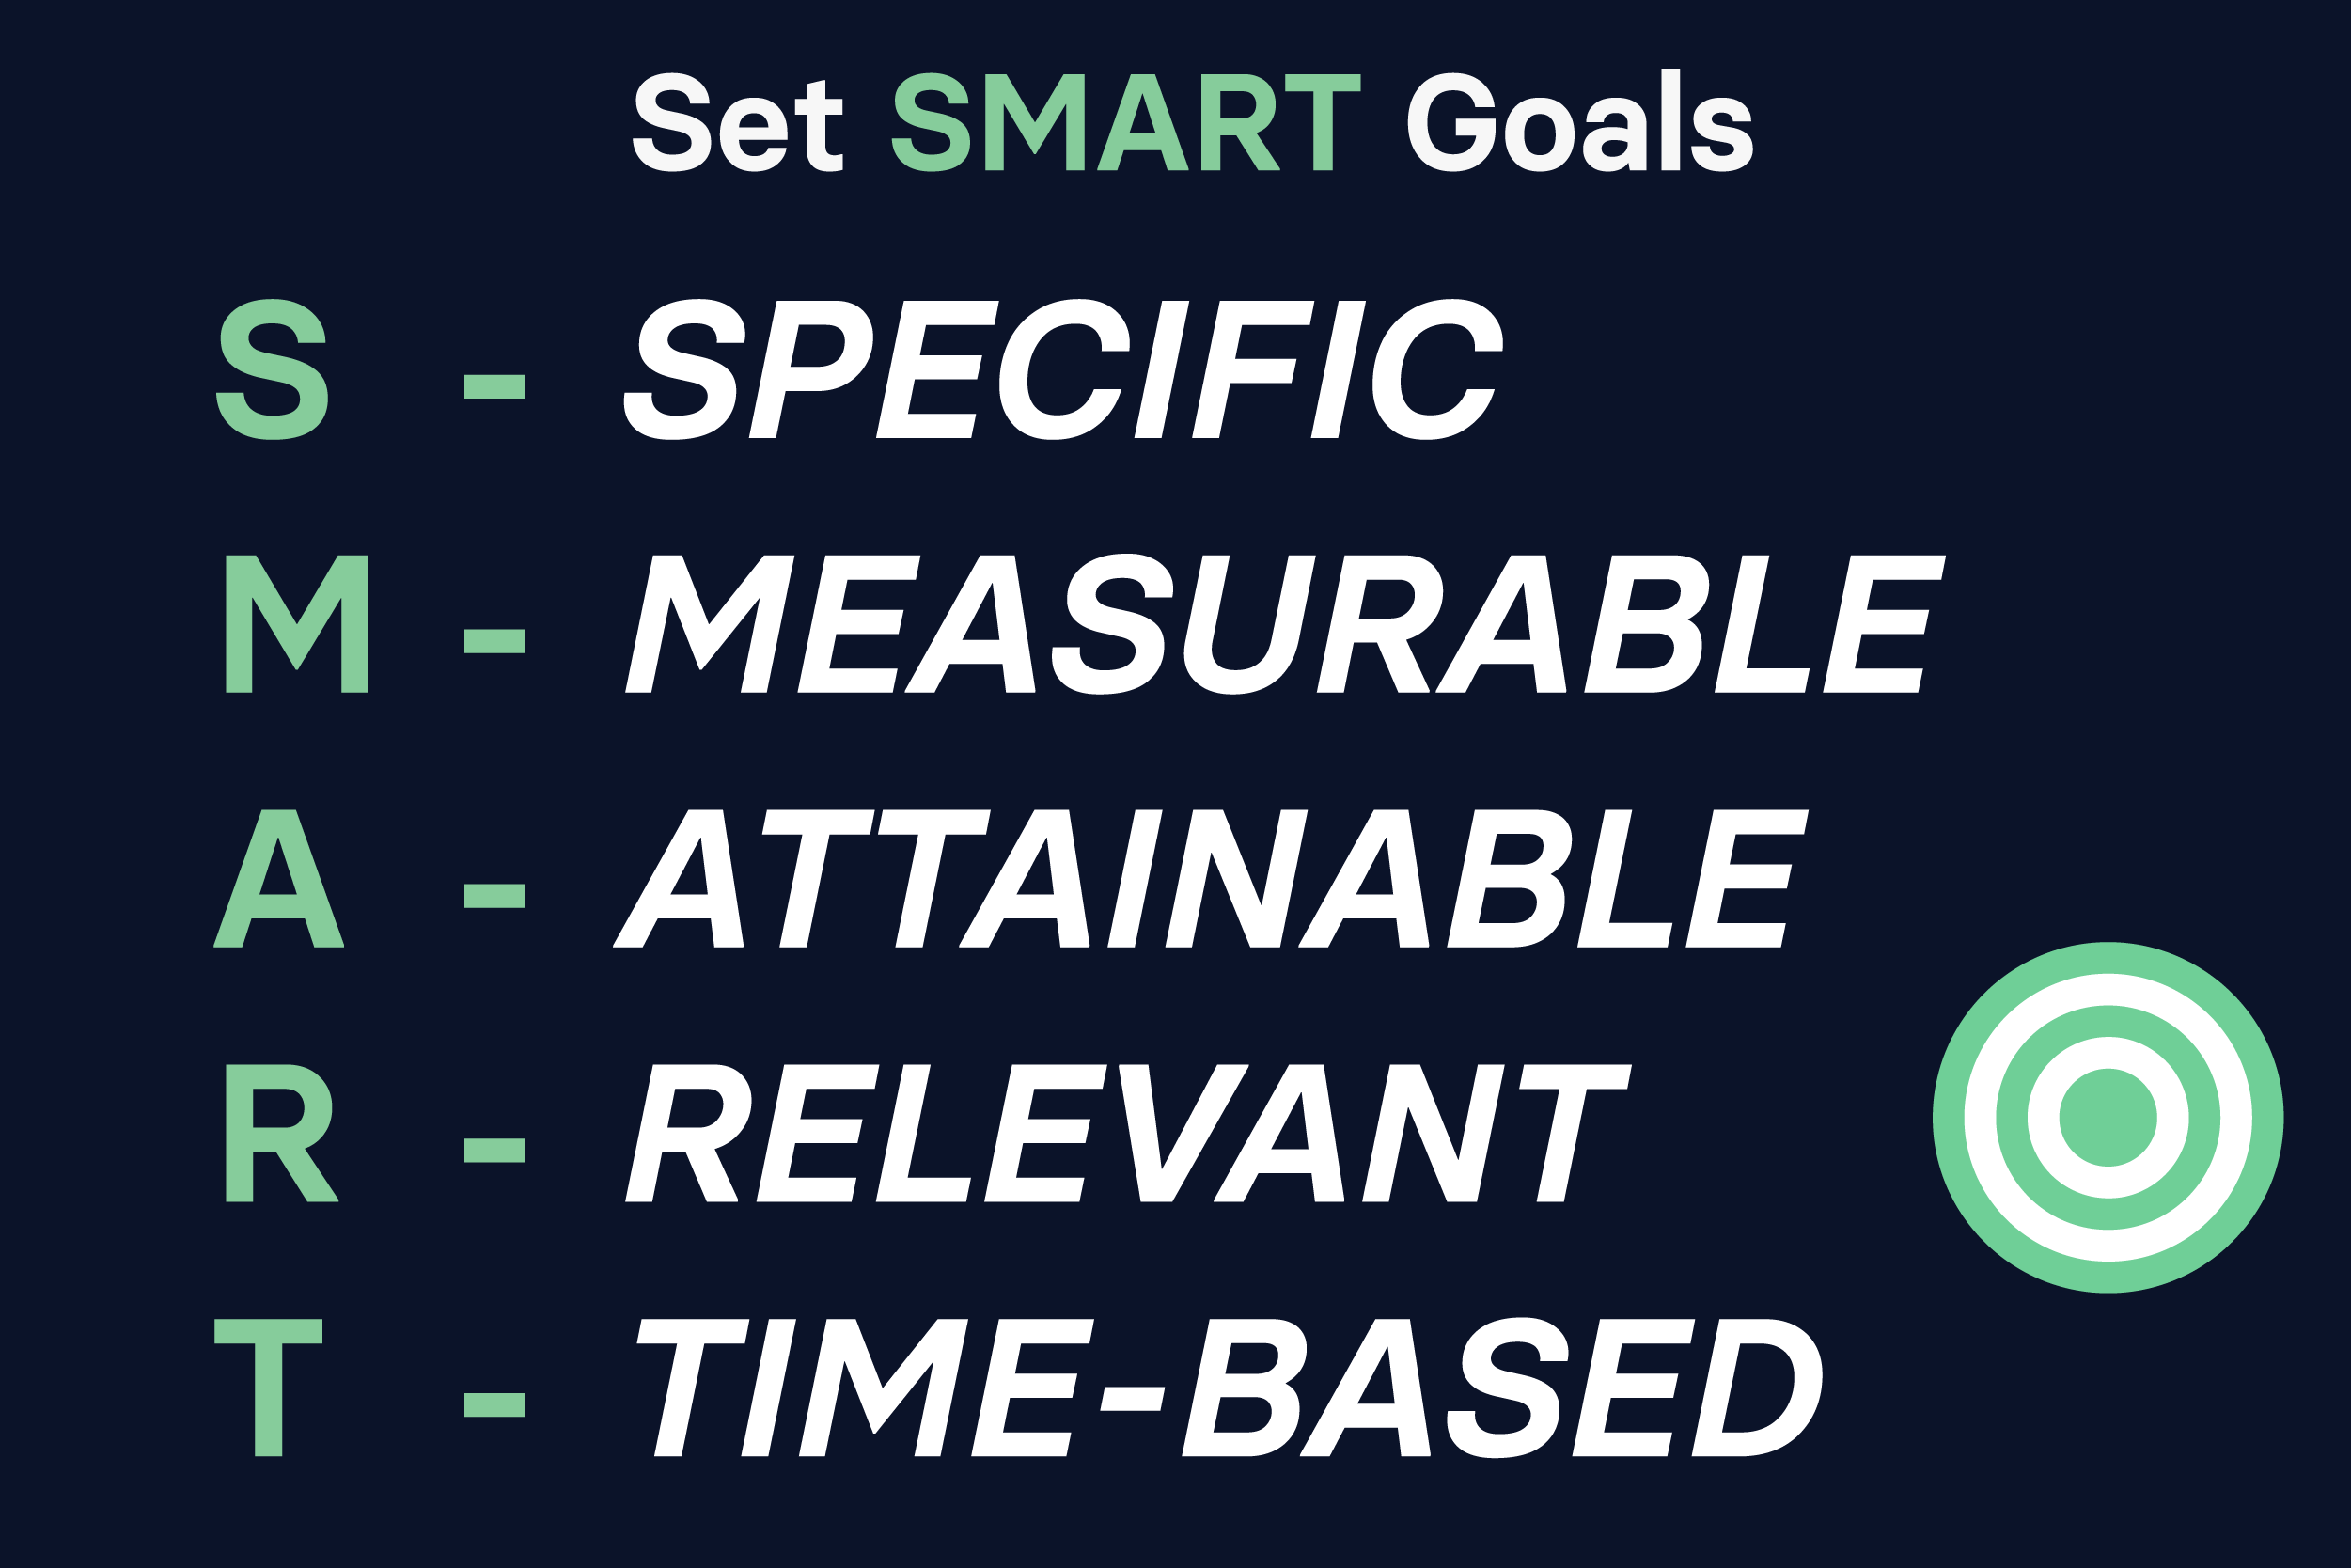 Graphic showing the meaning of SMART goals